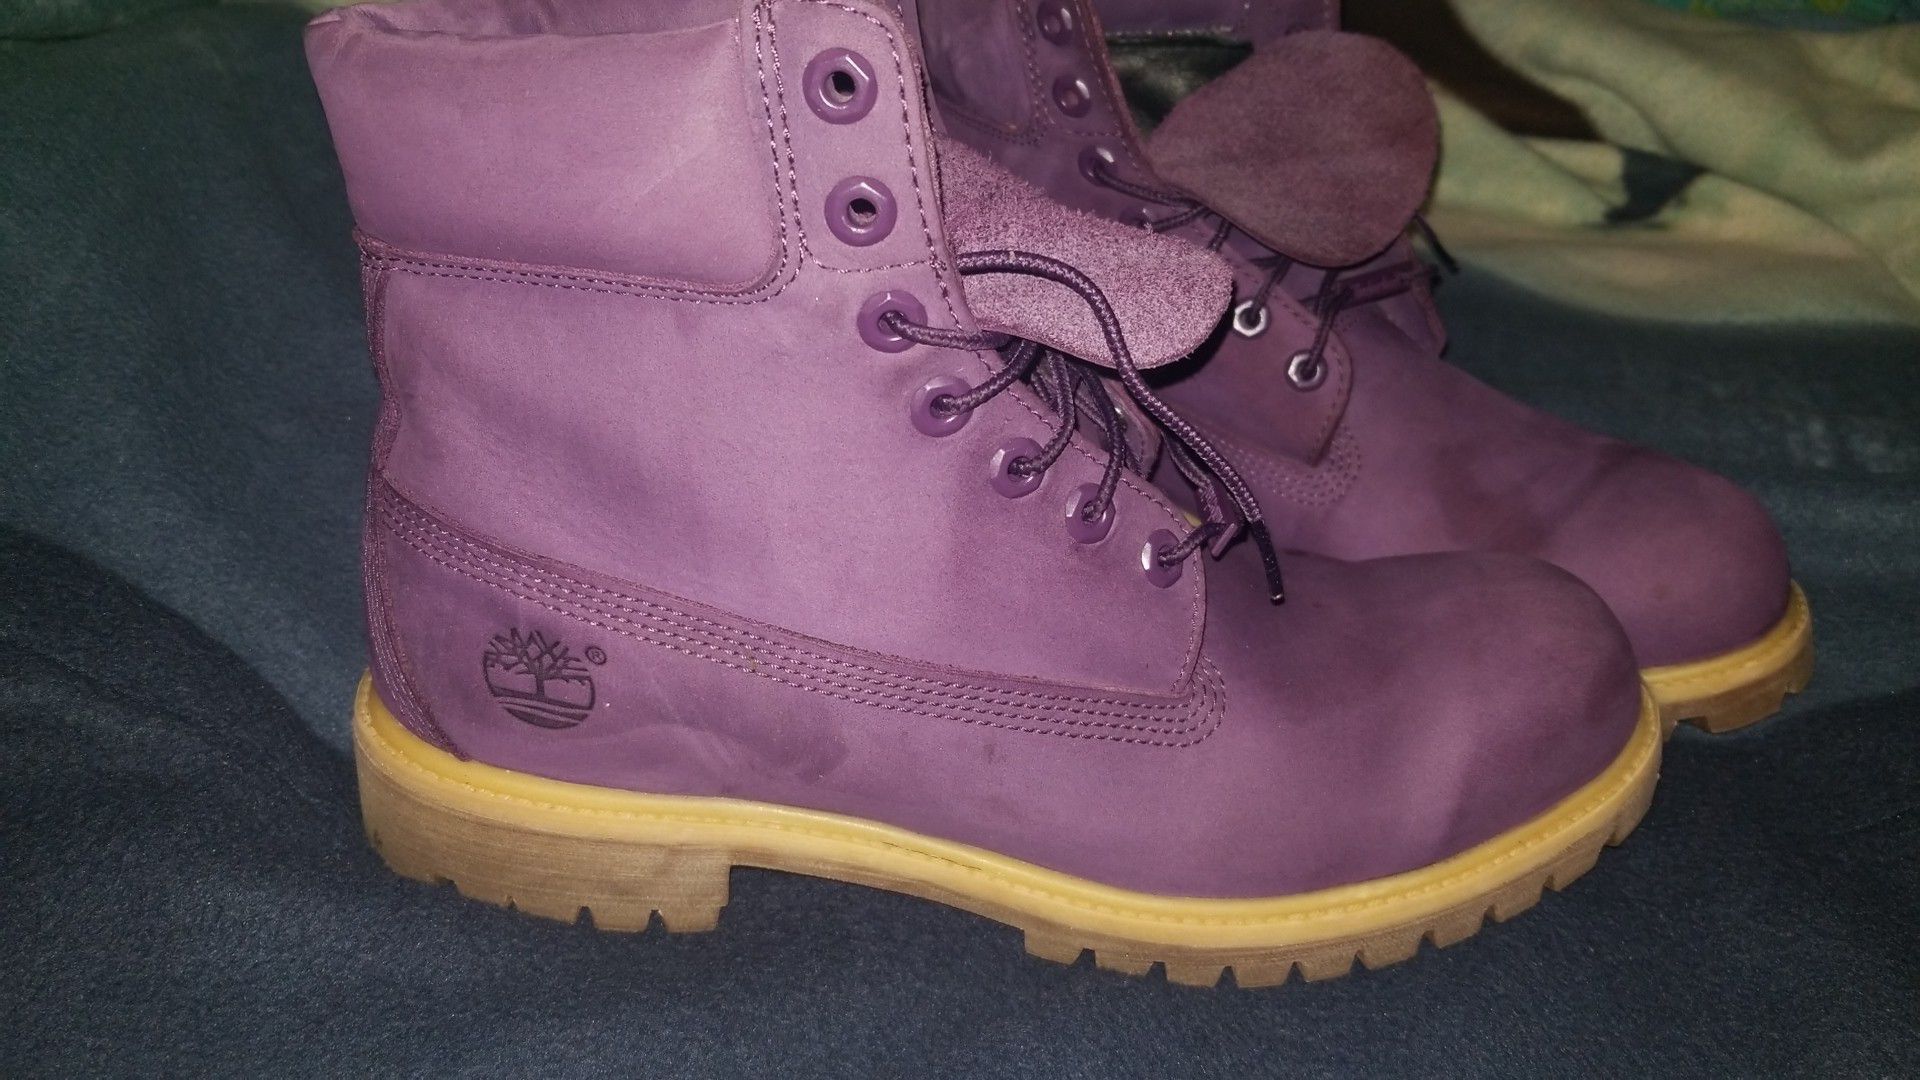 Timberland collection.